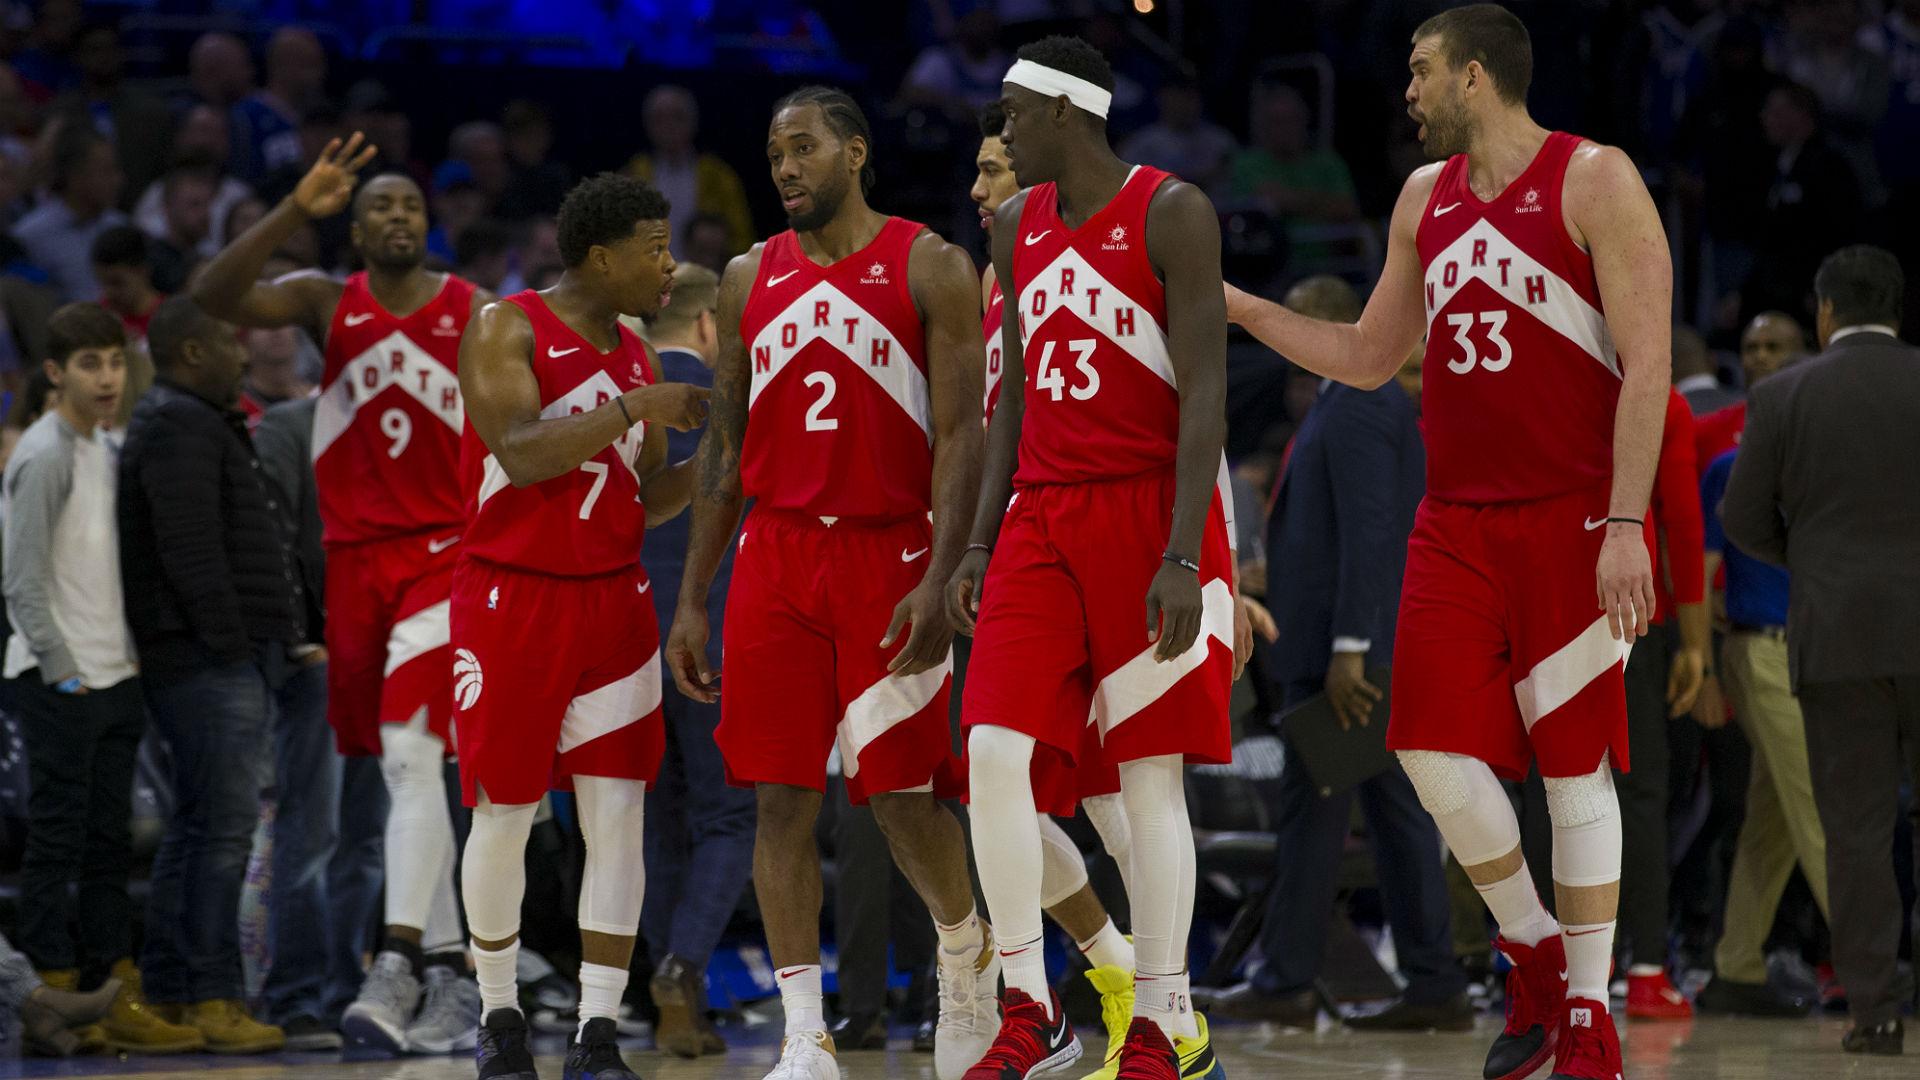 If the Toronto Raptors win 2019 NBA Finals, will they visit